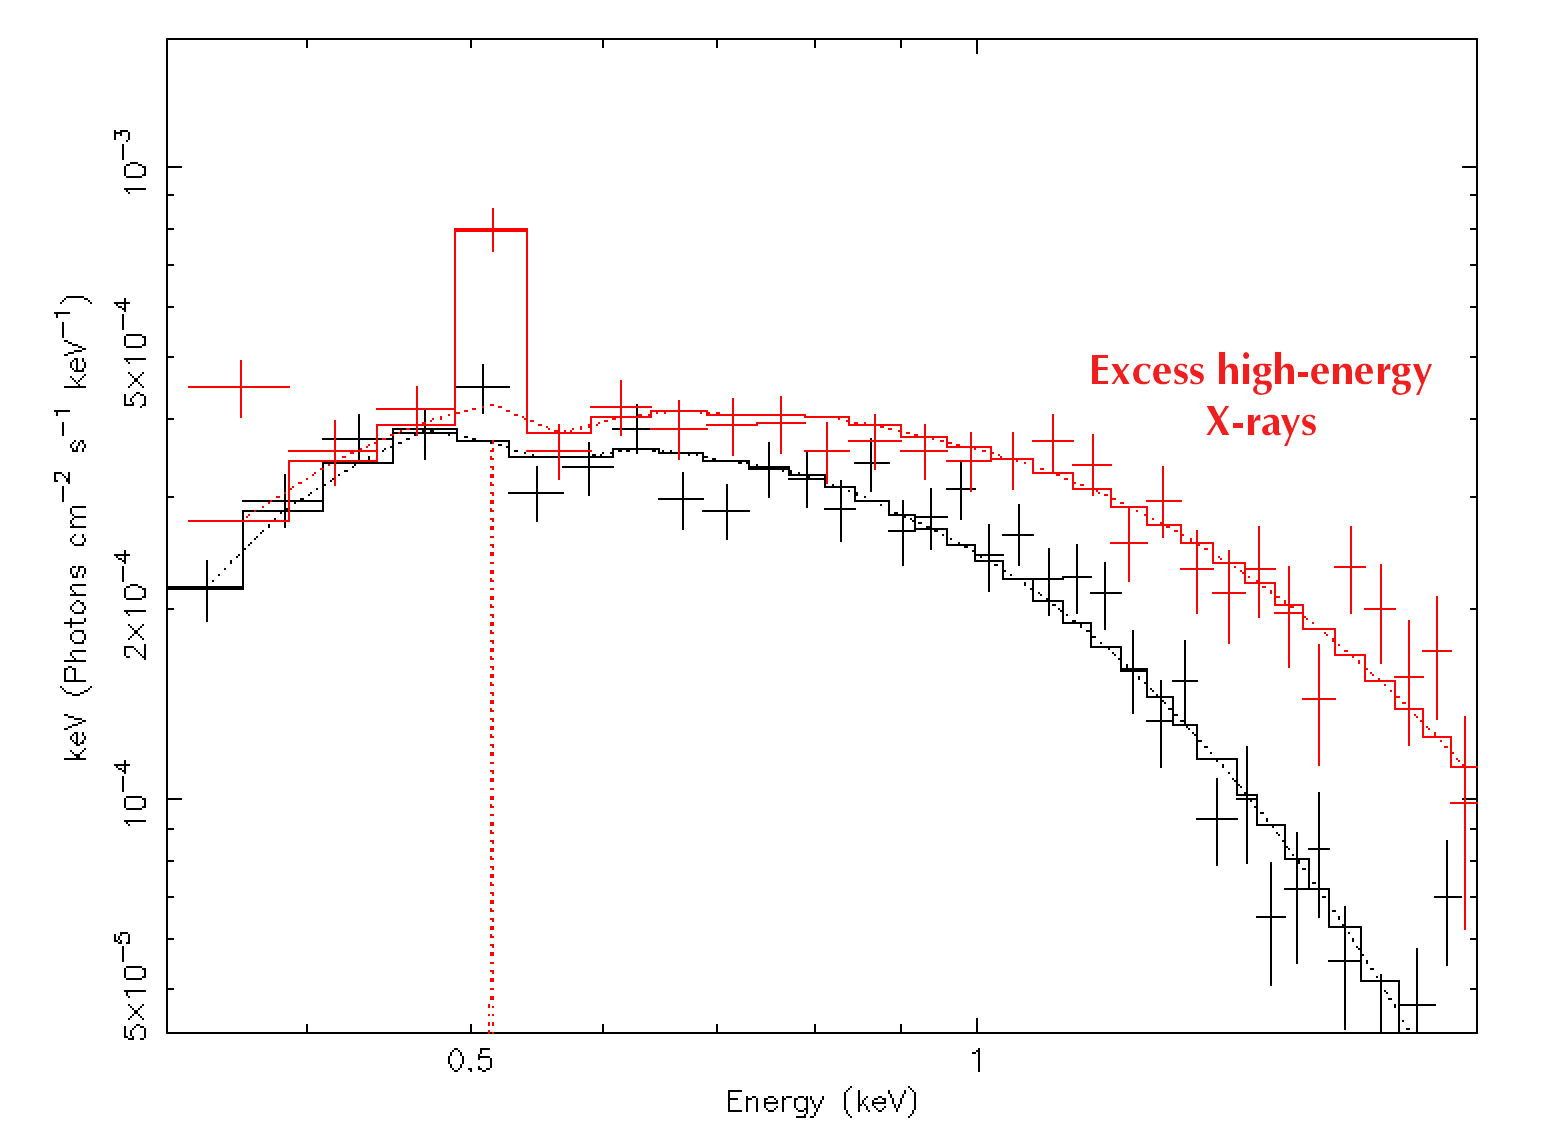 NICER and XMM X-ray spectra of the tidal disruption event AT2019teq. NICER data were acquired 3 years after the stellar disruption triggered a visible-light outburst, while the XMM spectrum was obtained less than 2 months prior to the NICER observation. The NICER data show the emergence of an excess at high energies. (The peak in the NICER spectrum near 0.5 keV photon energy is a feature that originates in ionized oxygen atoms in the Earth's upper atmosphere.) 